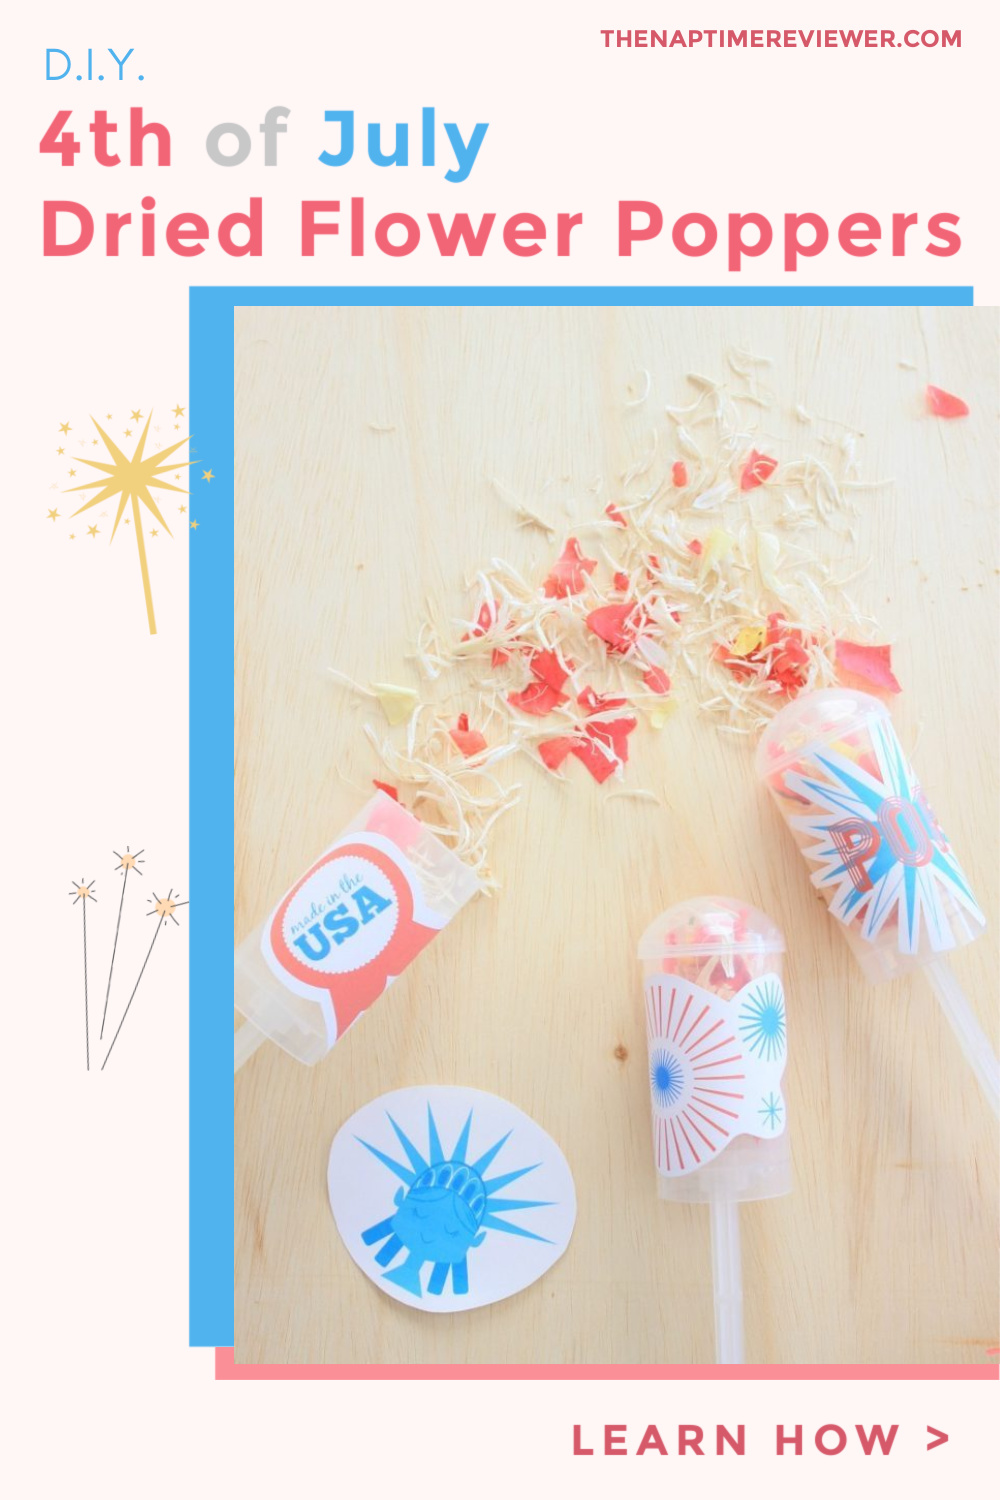 DIY Dried Flower Poppers for 4th of July